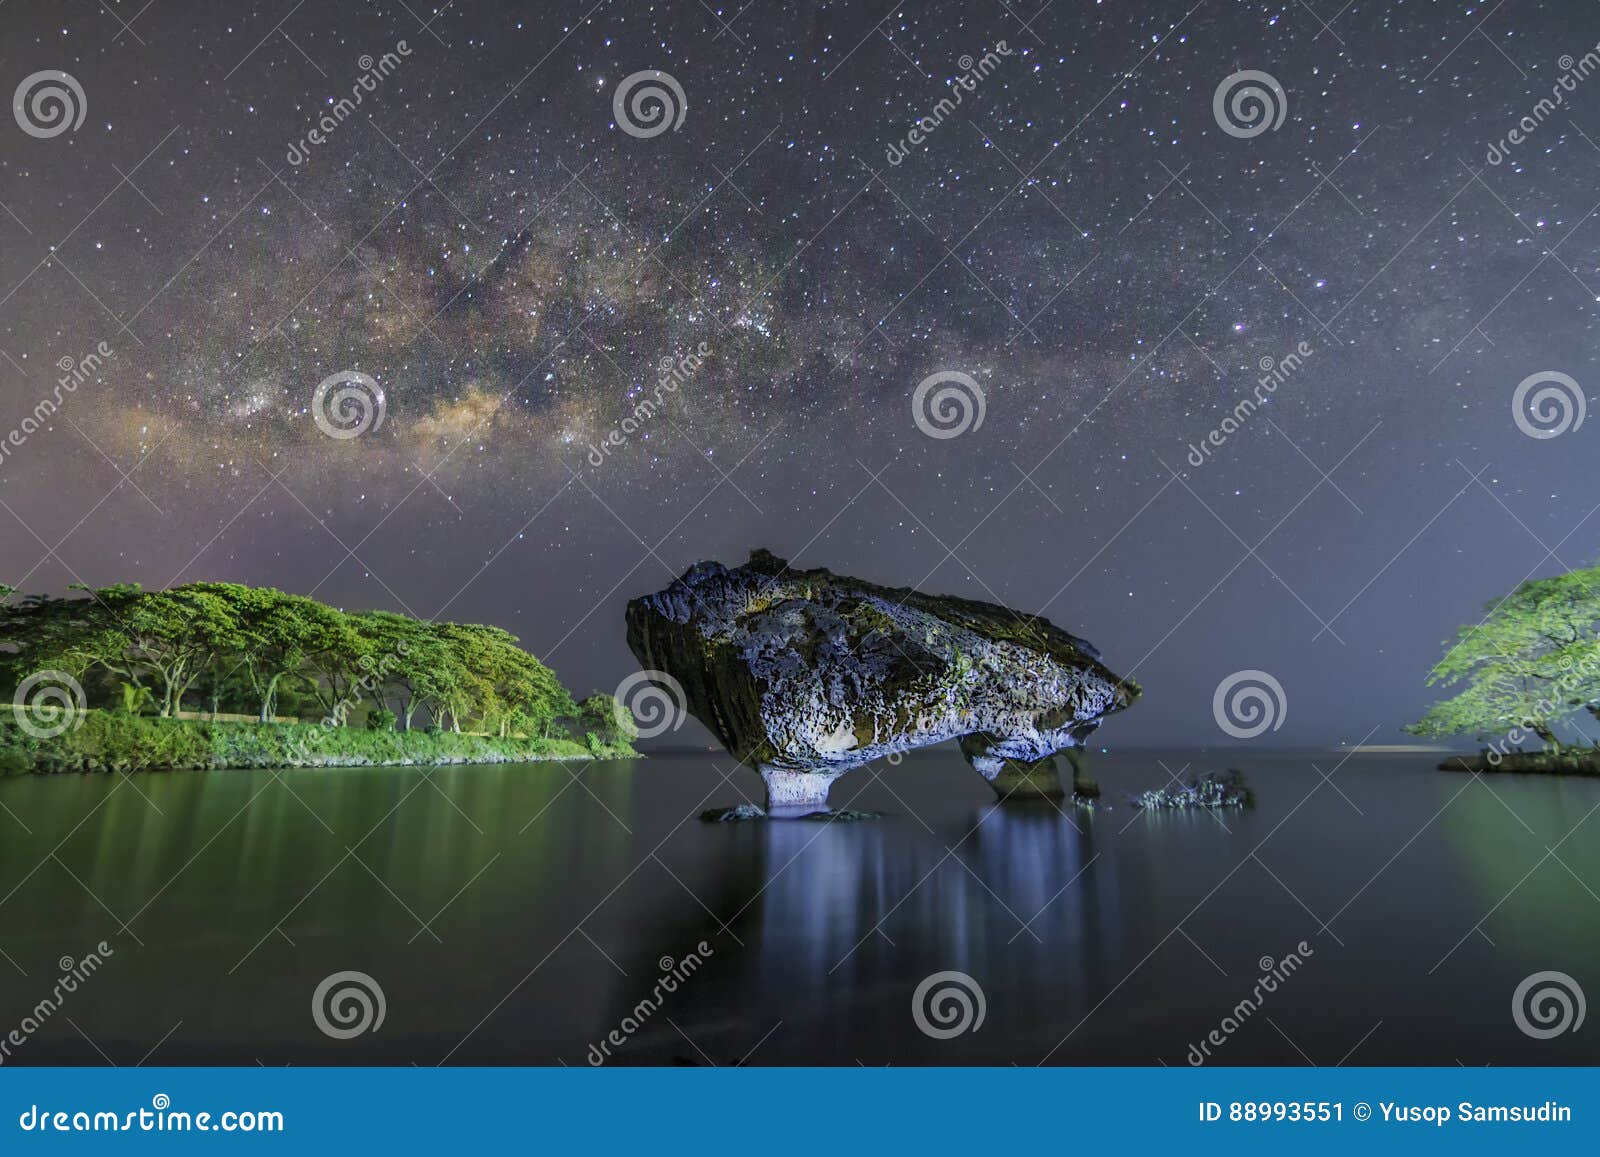 cow rock and the milkyway